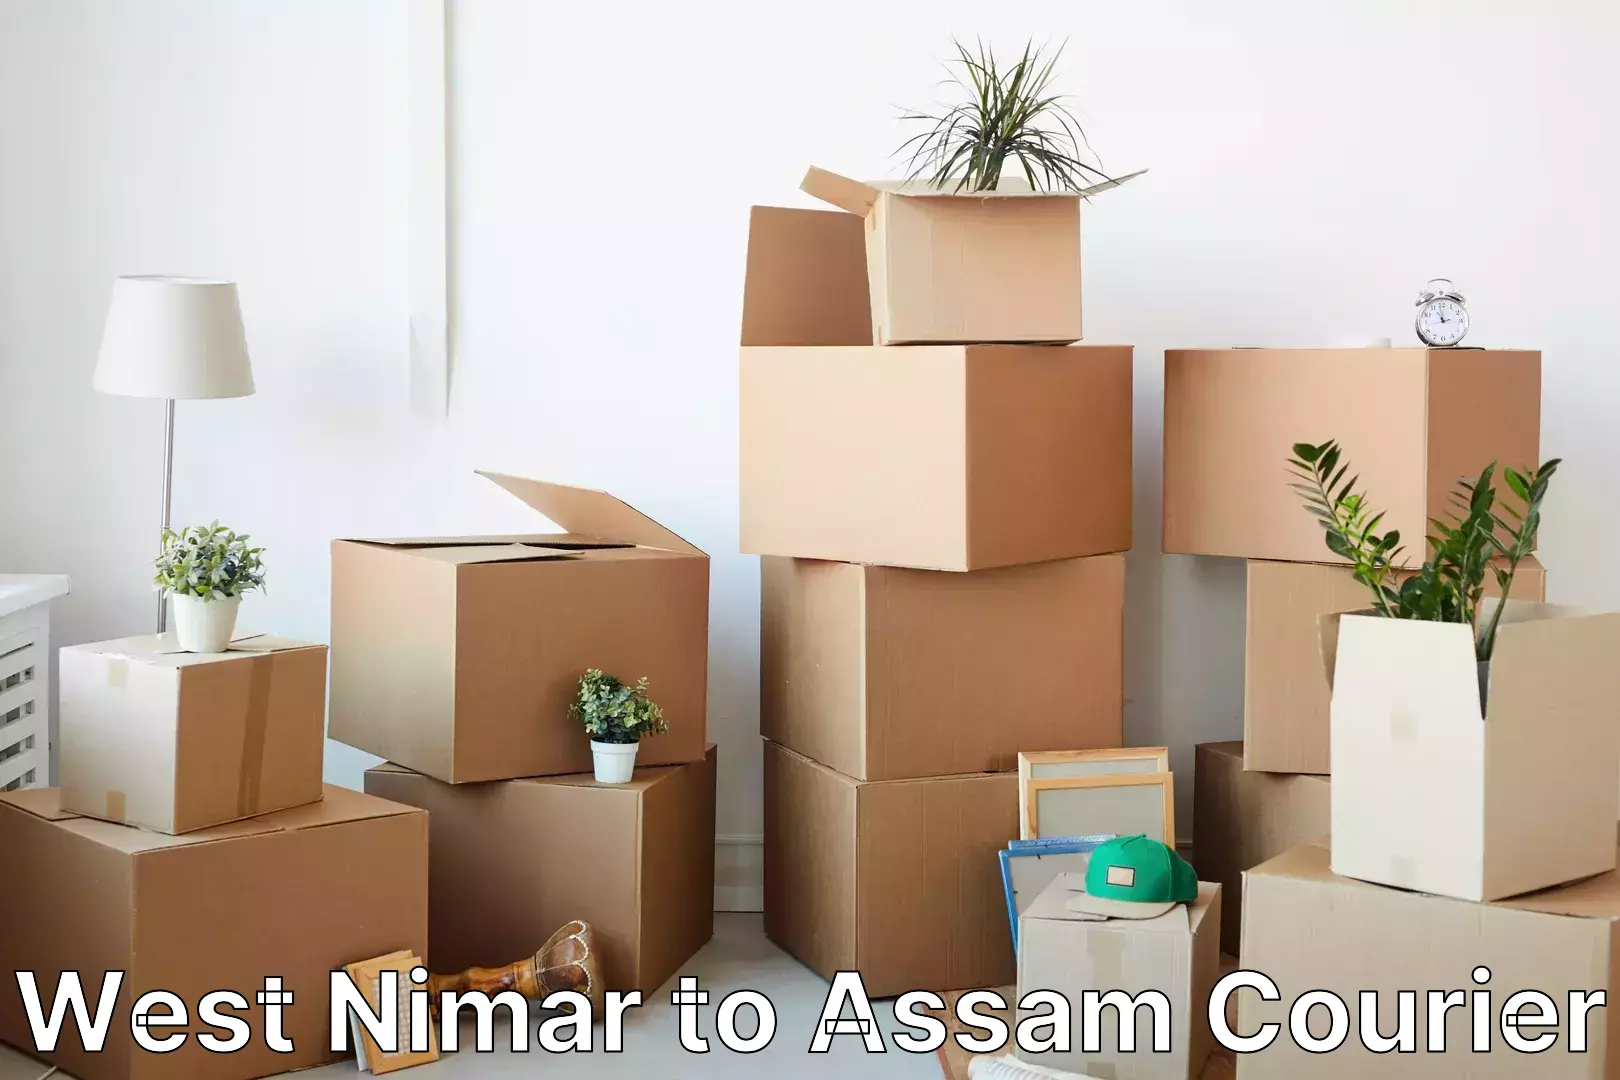 Luggage transport consulting West Nimar to Assam